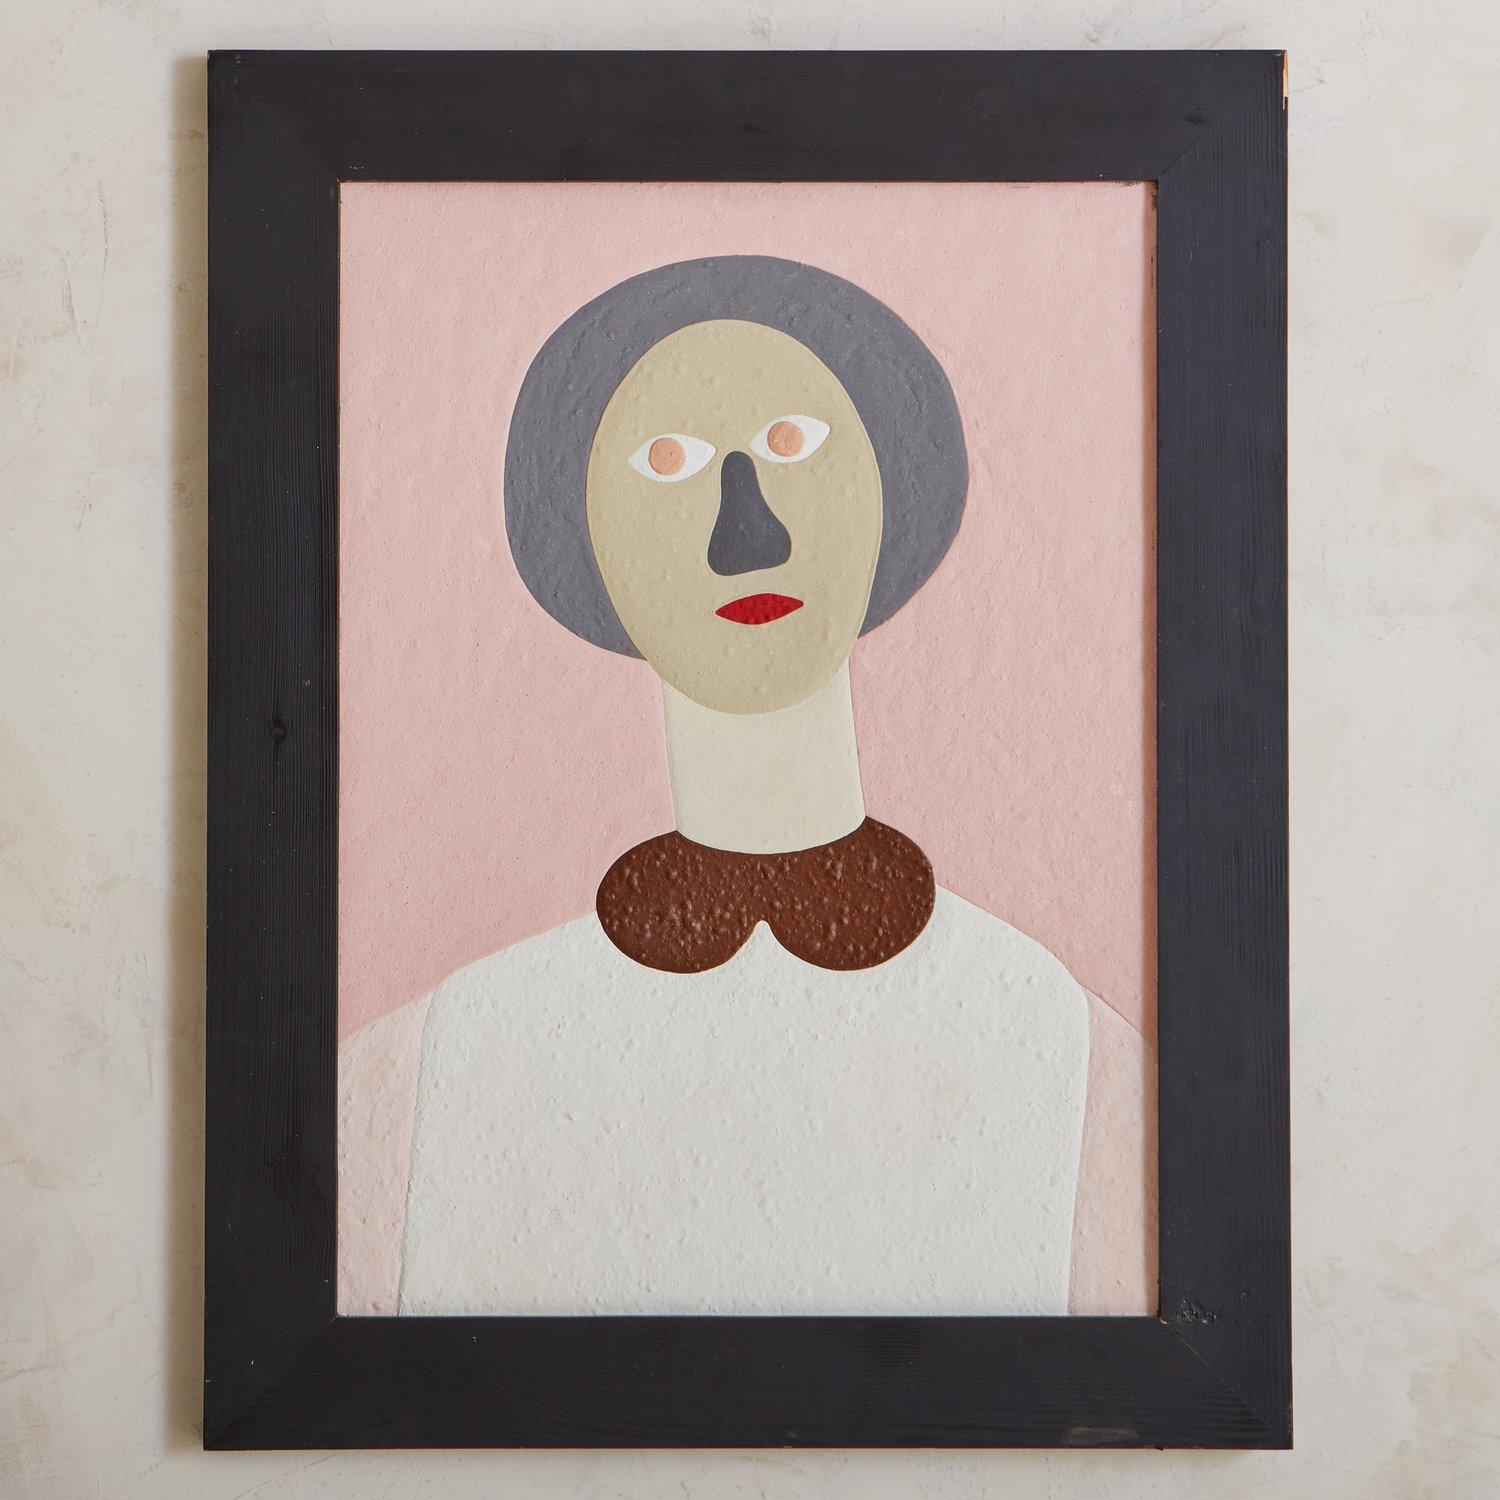 A figurative mixed media painting on board created by Bavarian artist Peter M. Bauer in 1981. This piece has beautiful textural details and exemplifies Bauer’s signature style. It is presented in a black painted wood frame and depicts the artist’s